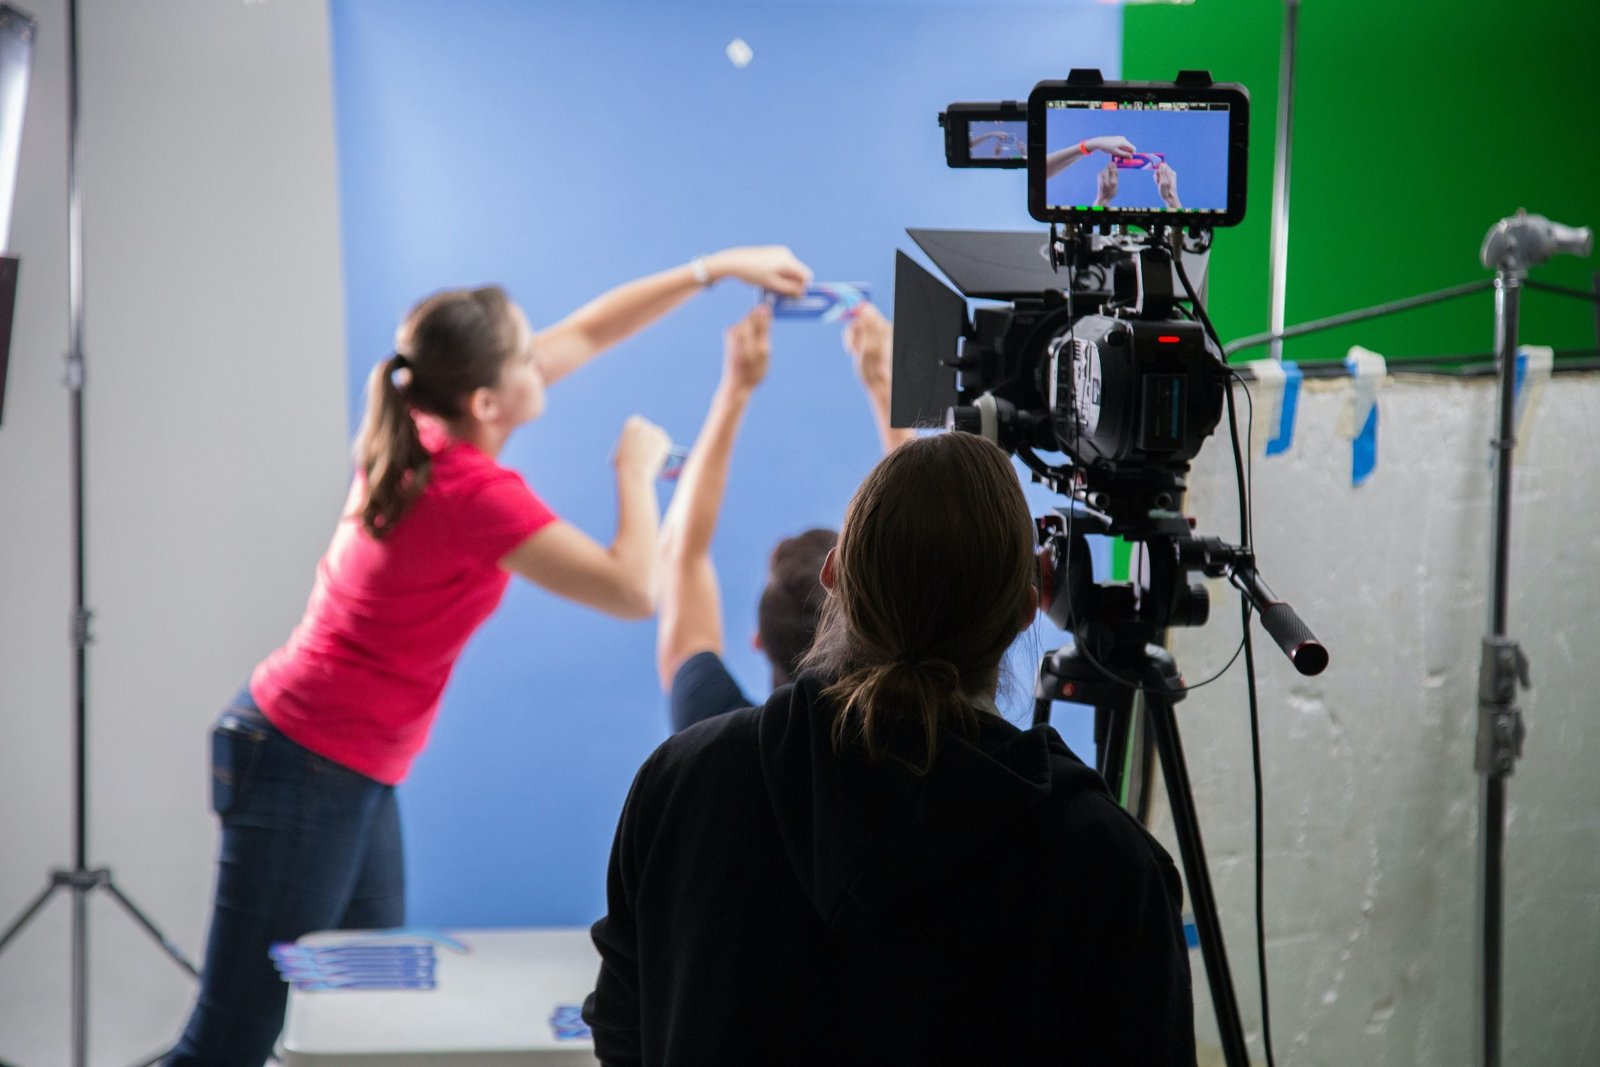 A woman placing a product in front of a camera for an advertisement in a studio